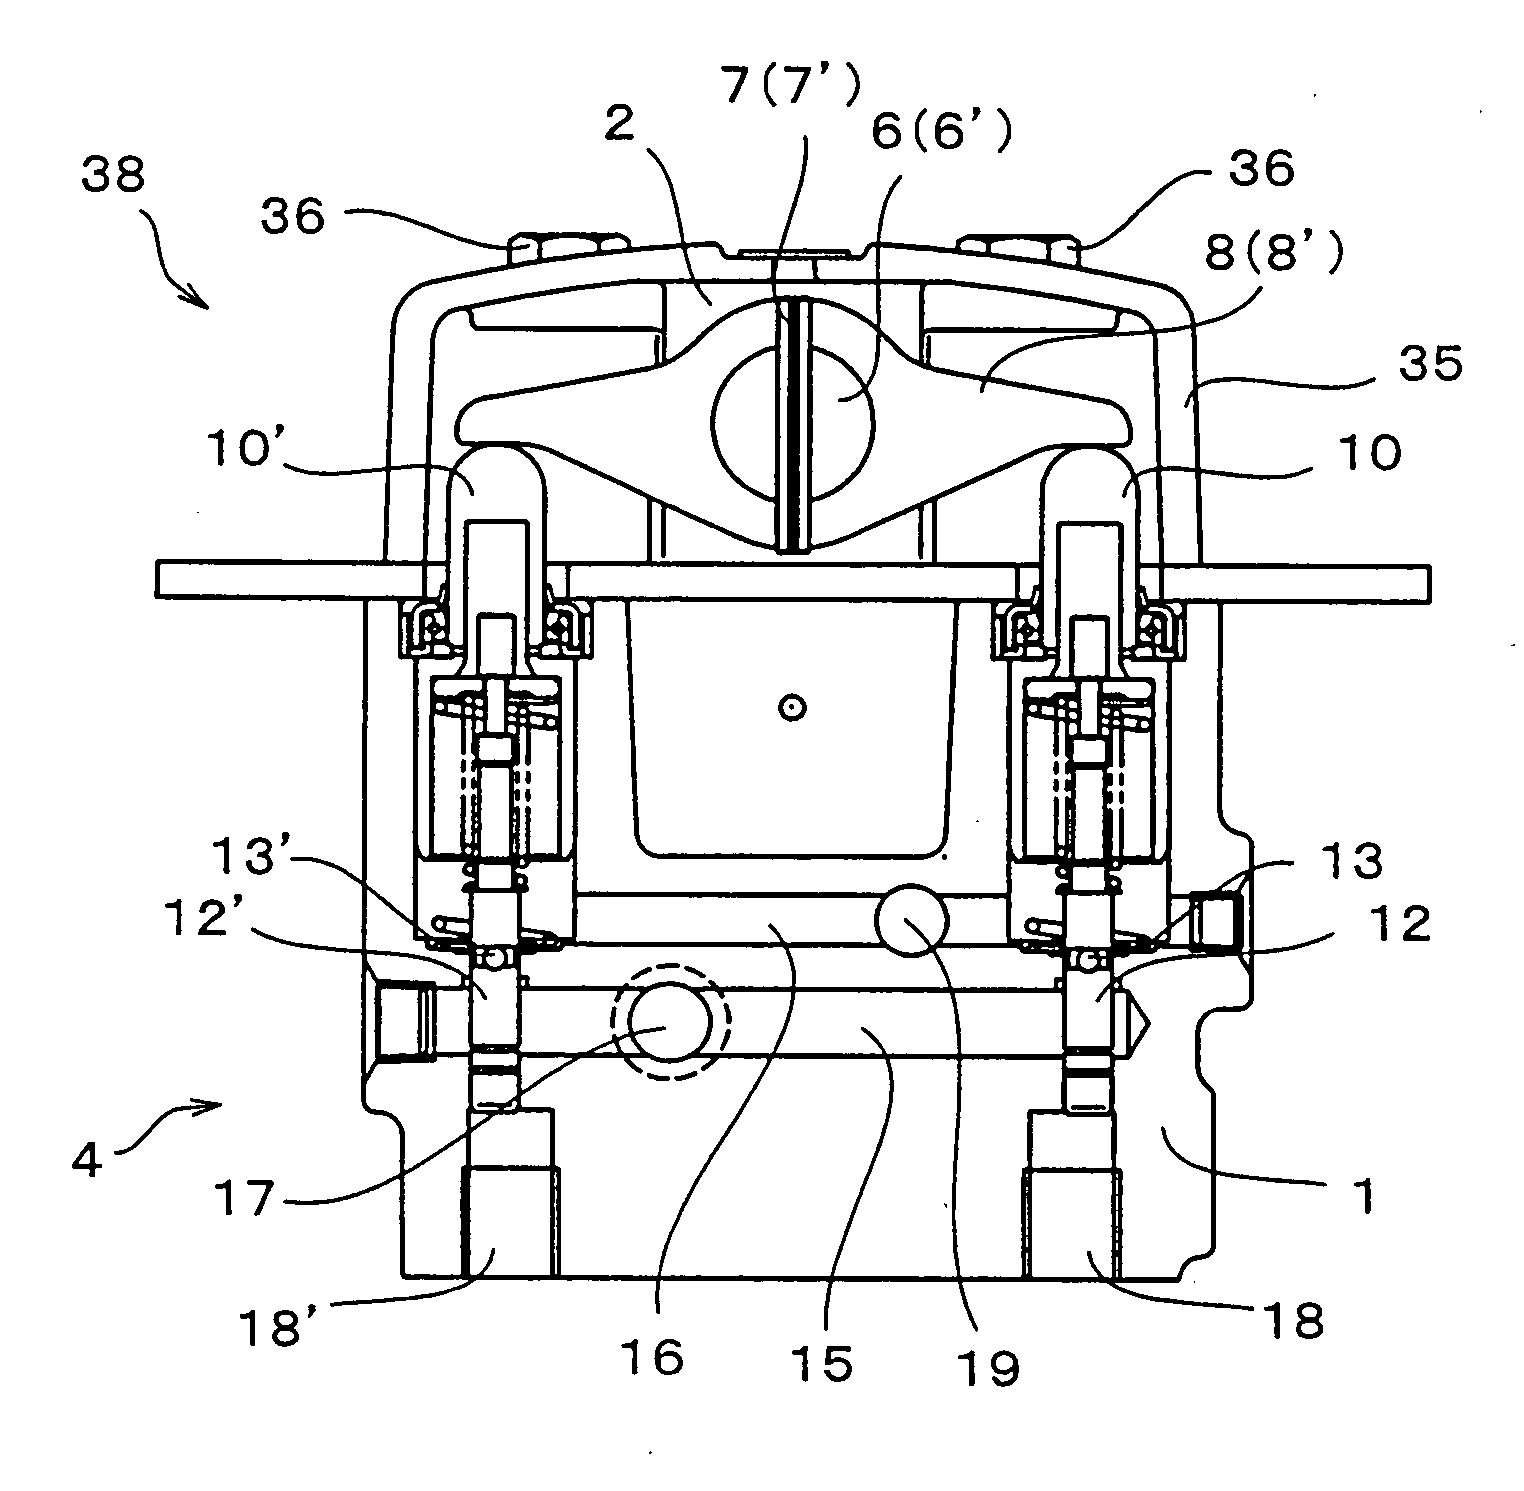 Operating lever device